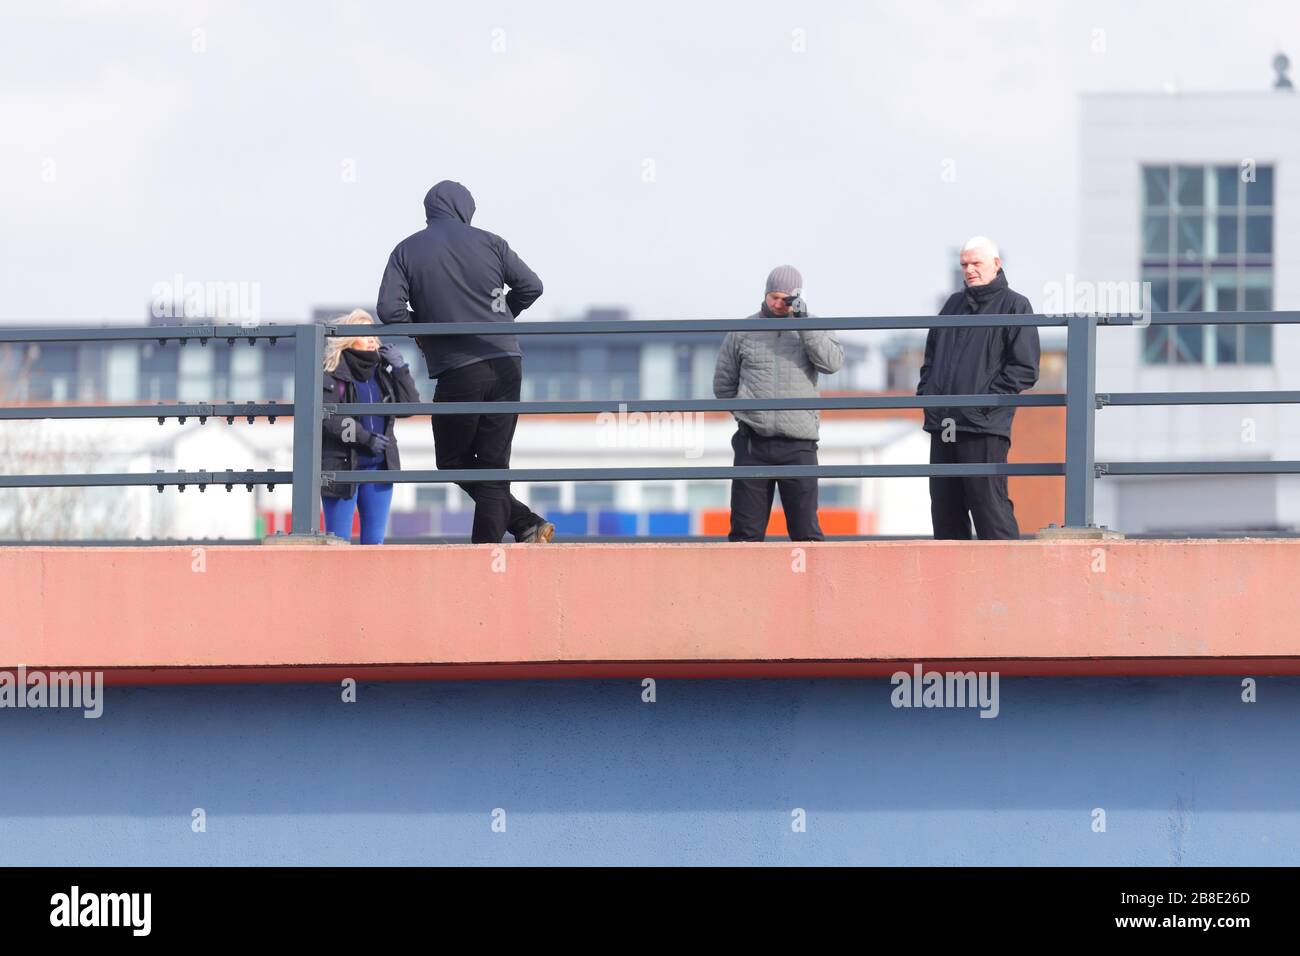 A suicidal man threatens to jump from a busy motorway bridge in Leeds, which resulted in the road being closed. The man was talked to safety. Stock Photo